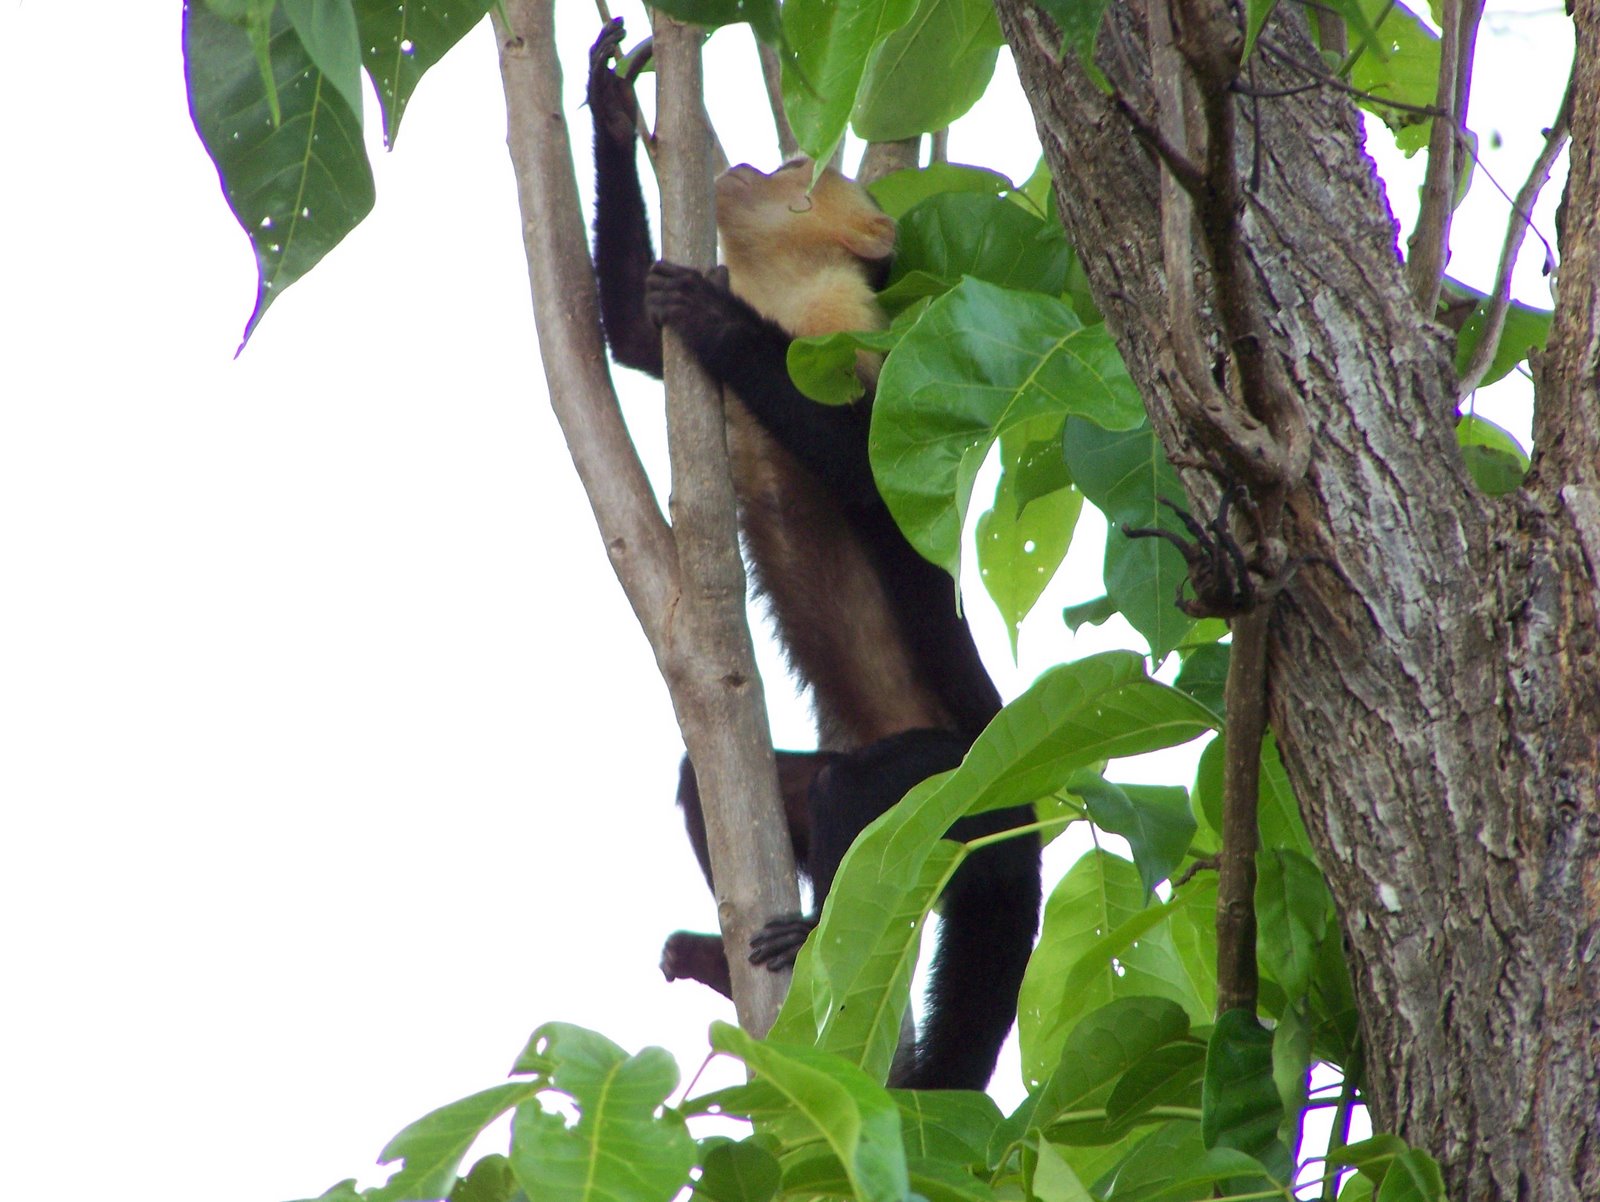 A white-faced capuchin monkey in the trees. 